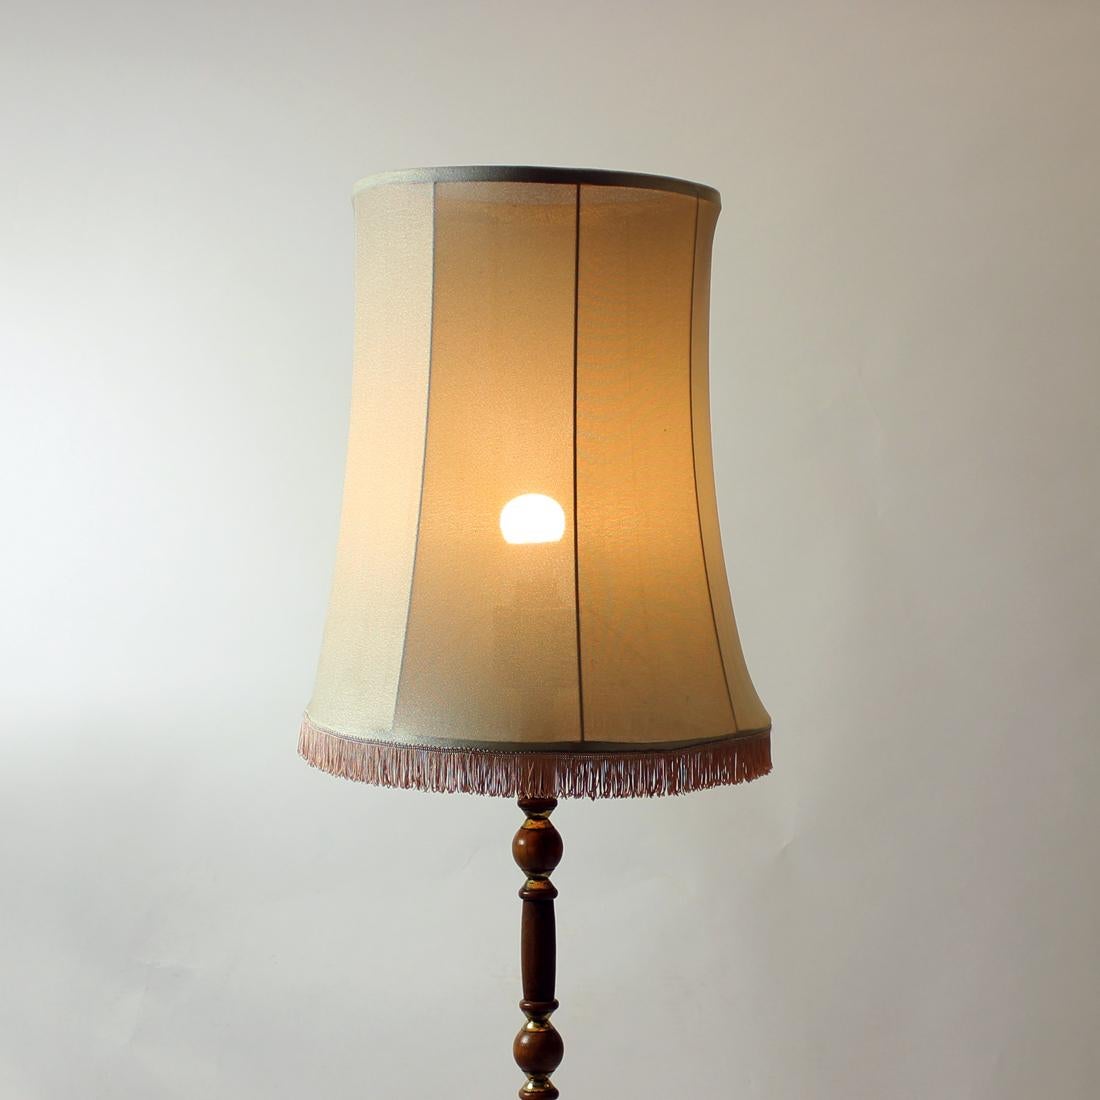 Beautiful floor lamp with a lot of original style. Produced in Czechoslovakia in 1950s. The lamp stands on a strong construction with three legs. It is made out of oak wood in combination with brass details. Beautiful style. Original shield of the